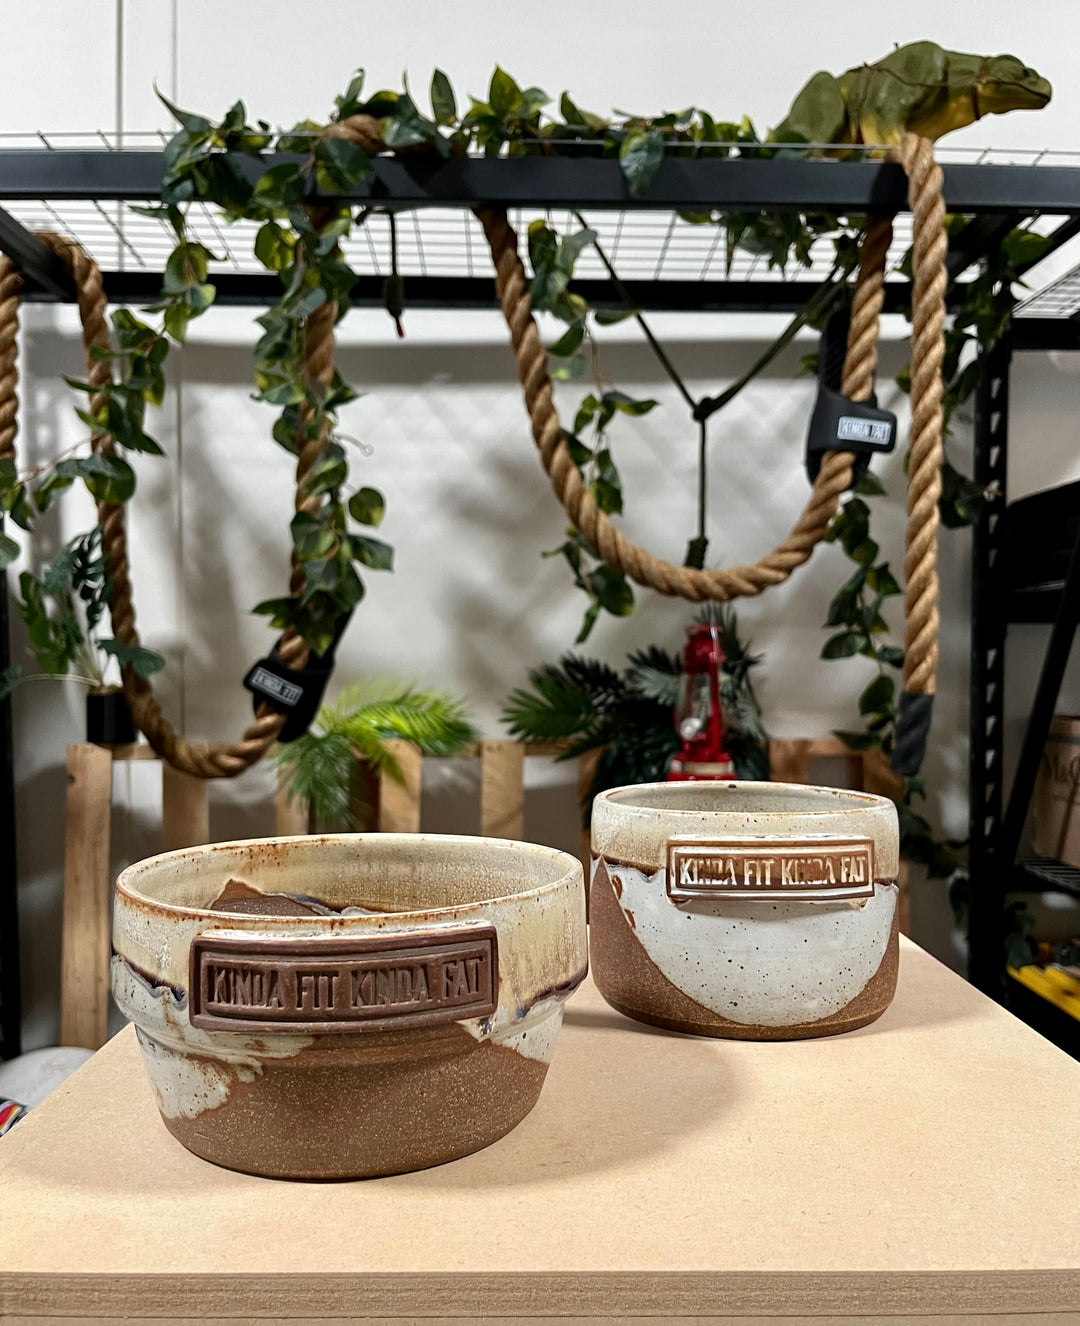 Feed the Feels Mini: Glazed and Confused Ceramics Exhibit